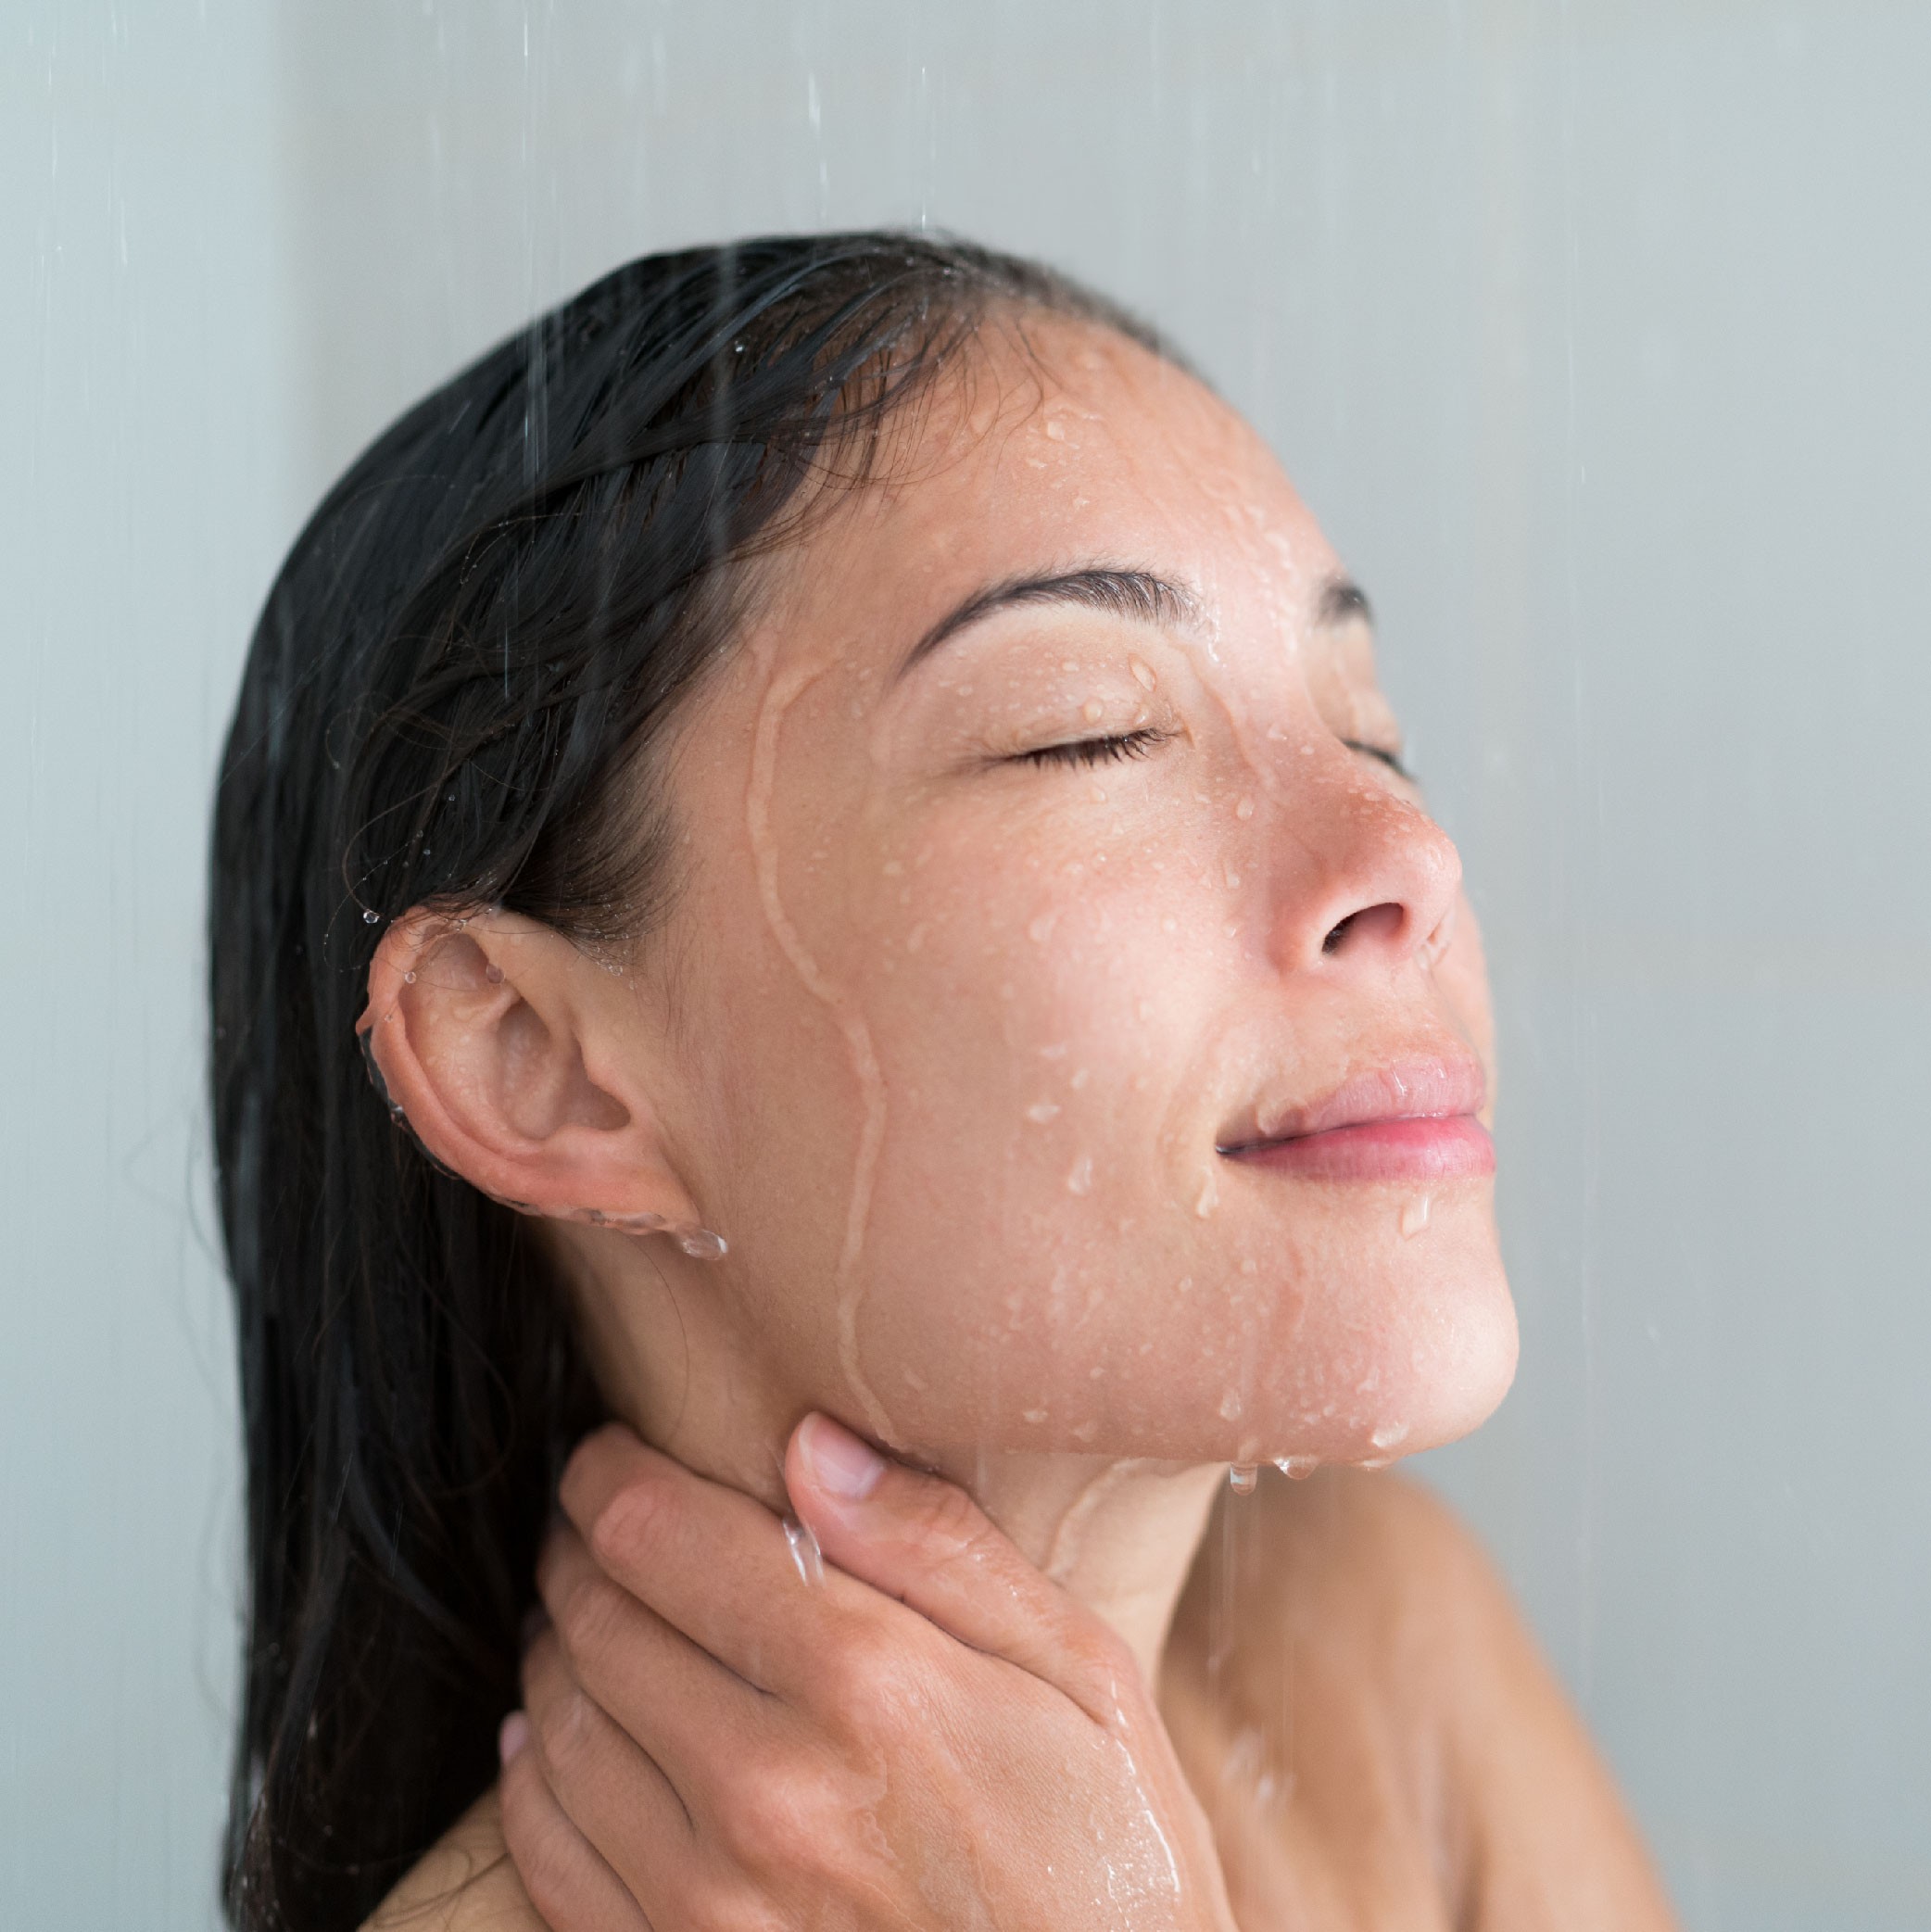 rinse your skin with warm water